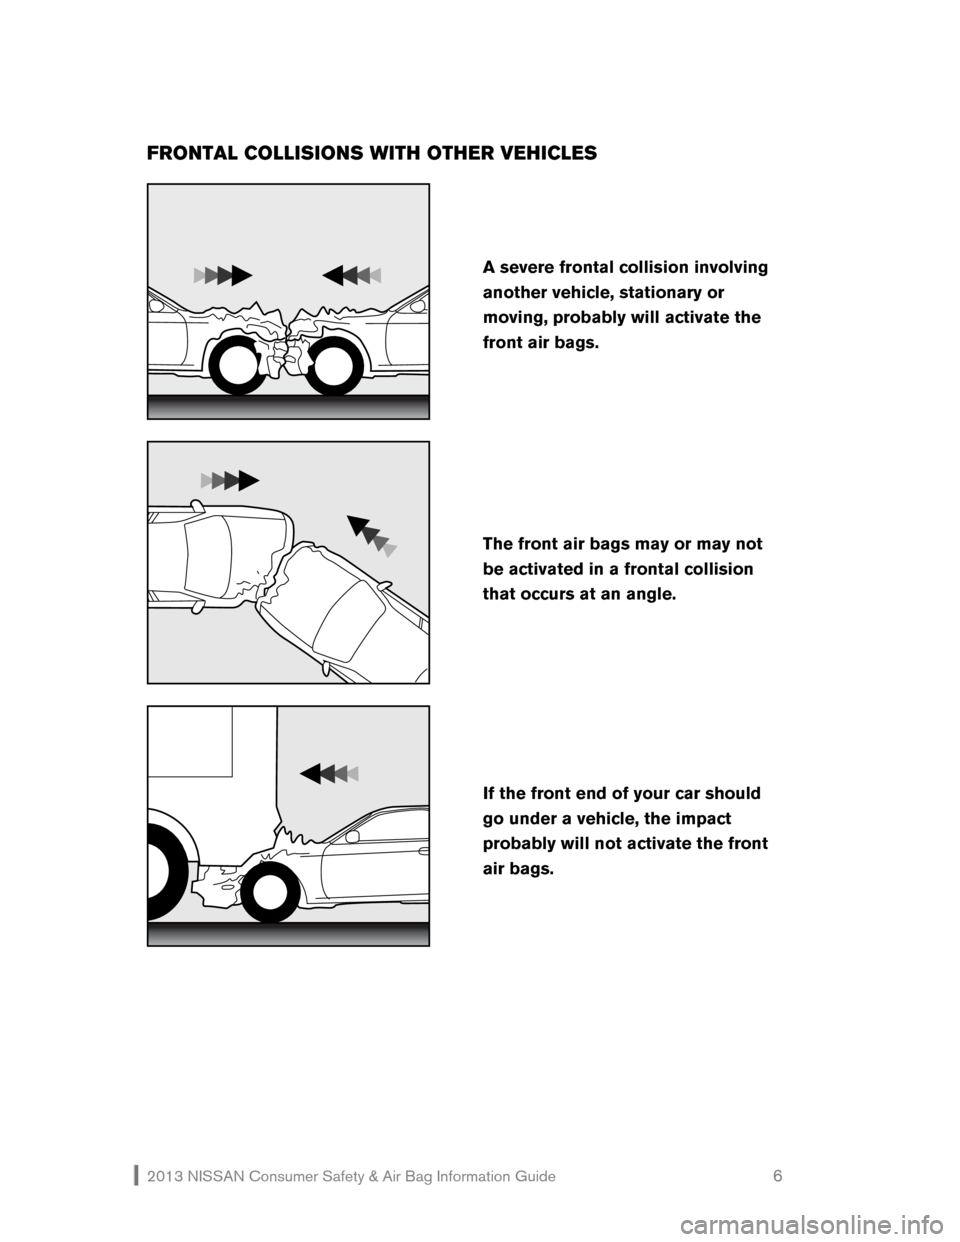 NISSAN TITAN 2013 1.G Consumer Safety Air Bag Information Guide 2013 NISSAN Consumer Safety & Air Bag Information Guide                                                   6 
FRONTAL COLLISIONS WITH OTHER VEHICLES 
 
 
 
 
If the front end of your car should 
go und